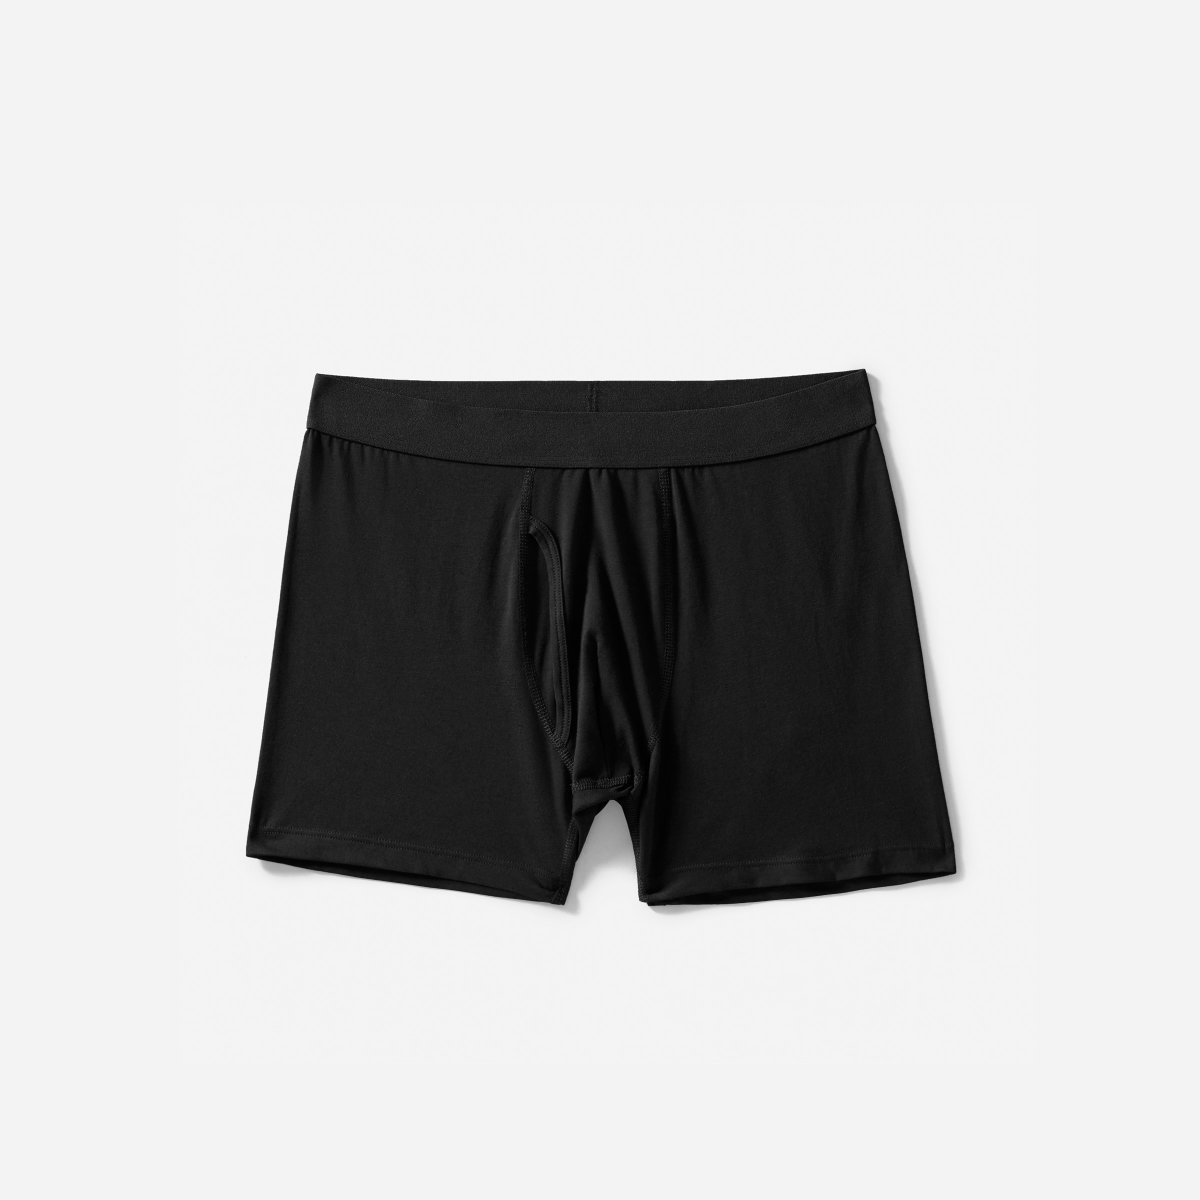 ALL-SORTS-EVERLANE-BOXERS